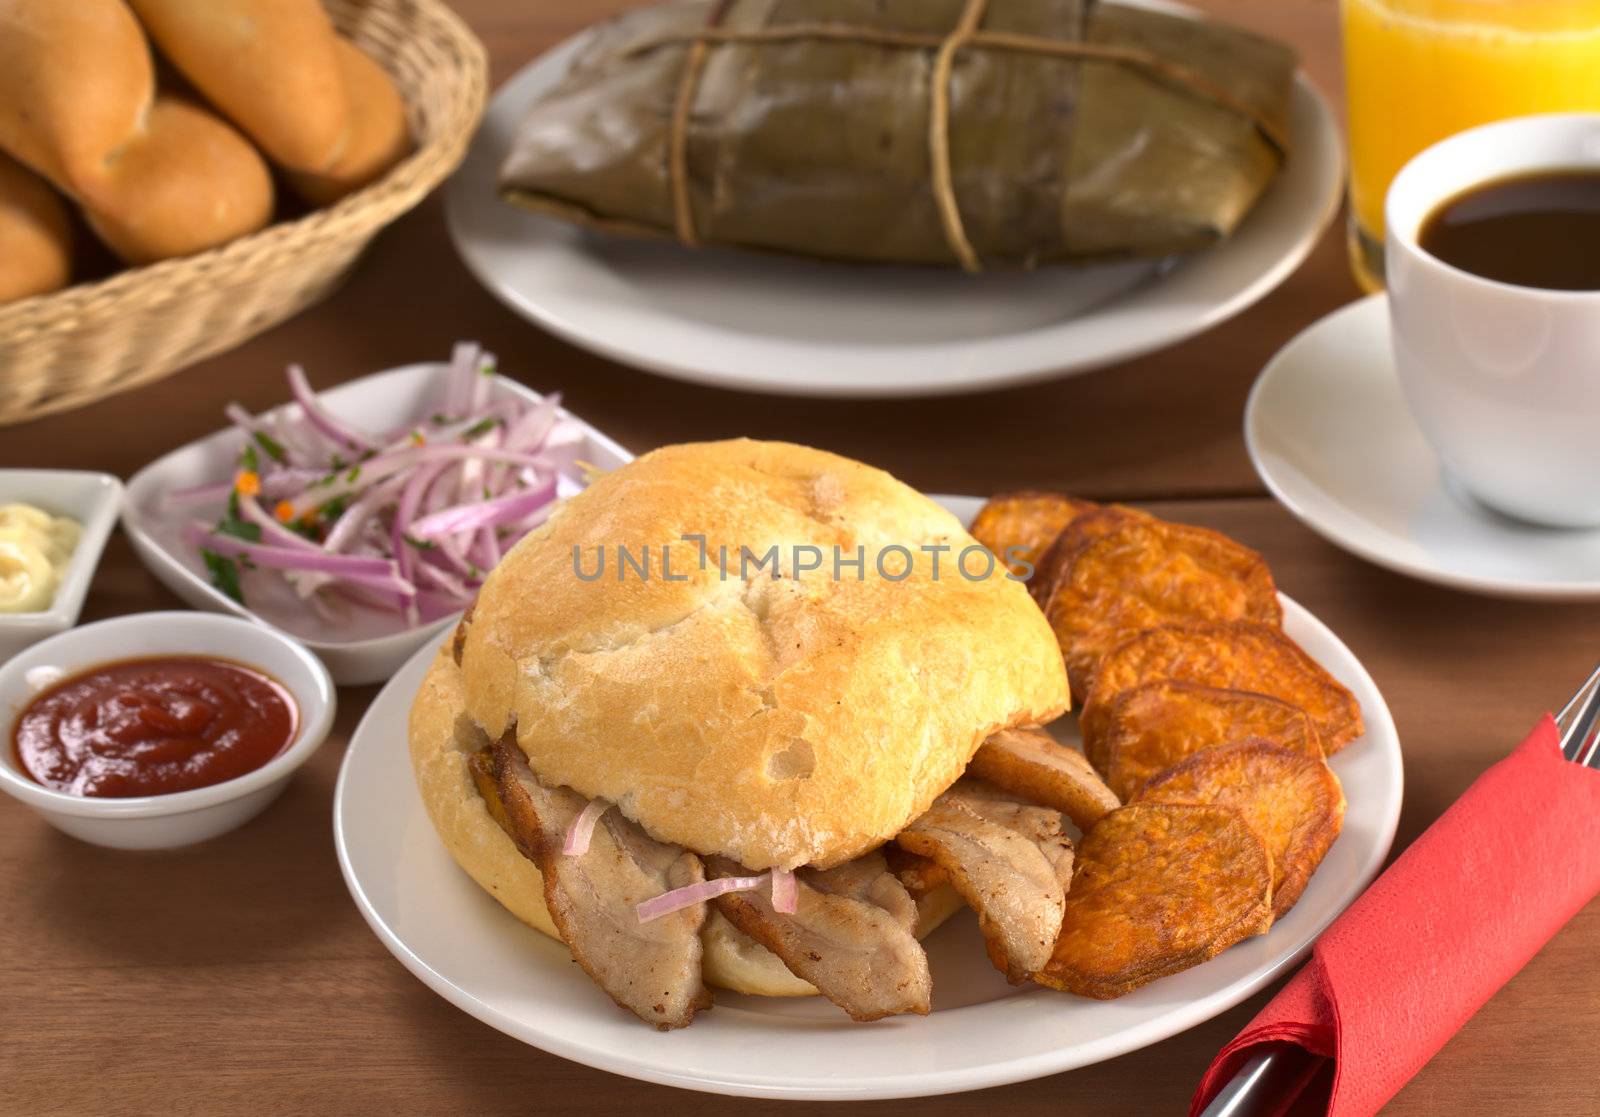 Typical Peruvian breakfast consisting of Pan con Chicharron (Bun with fried meat) and fried sweet potato, tamal (in the back), salsa criolla (onion salad) with coffee, orange juice and buns (Selective Focus, Focus on the front)